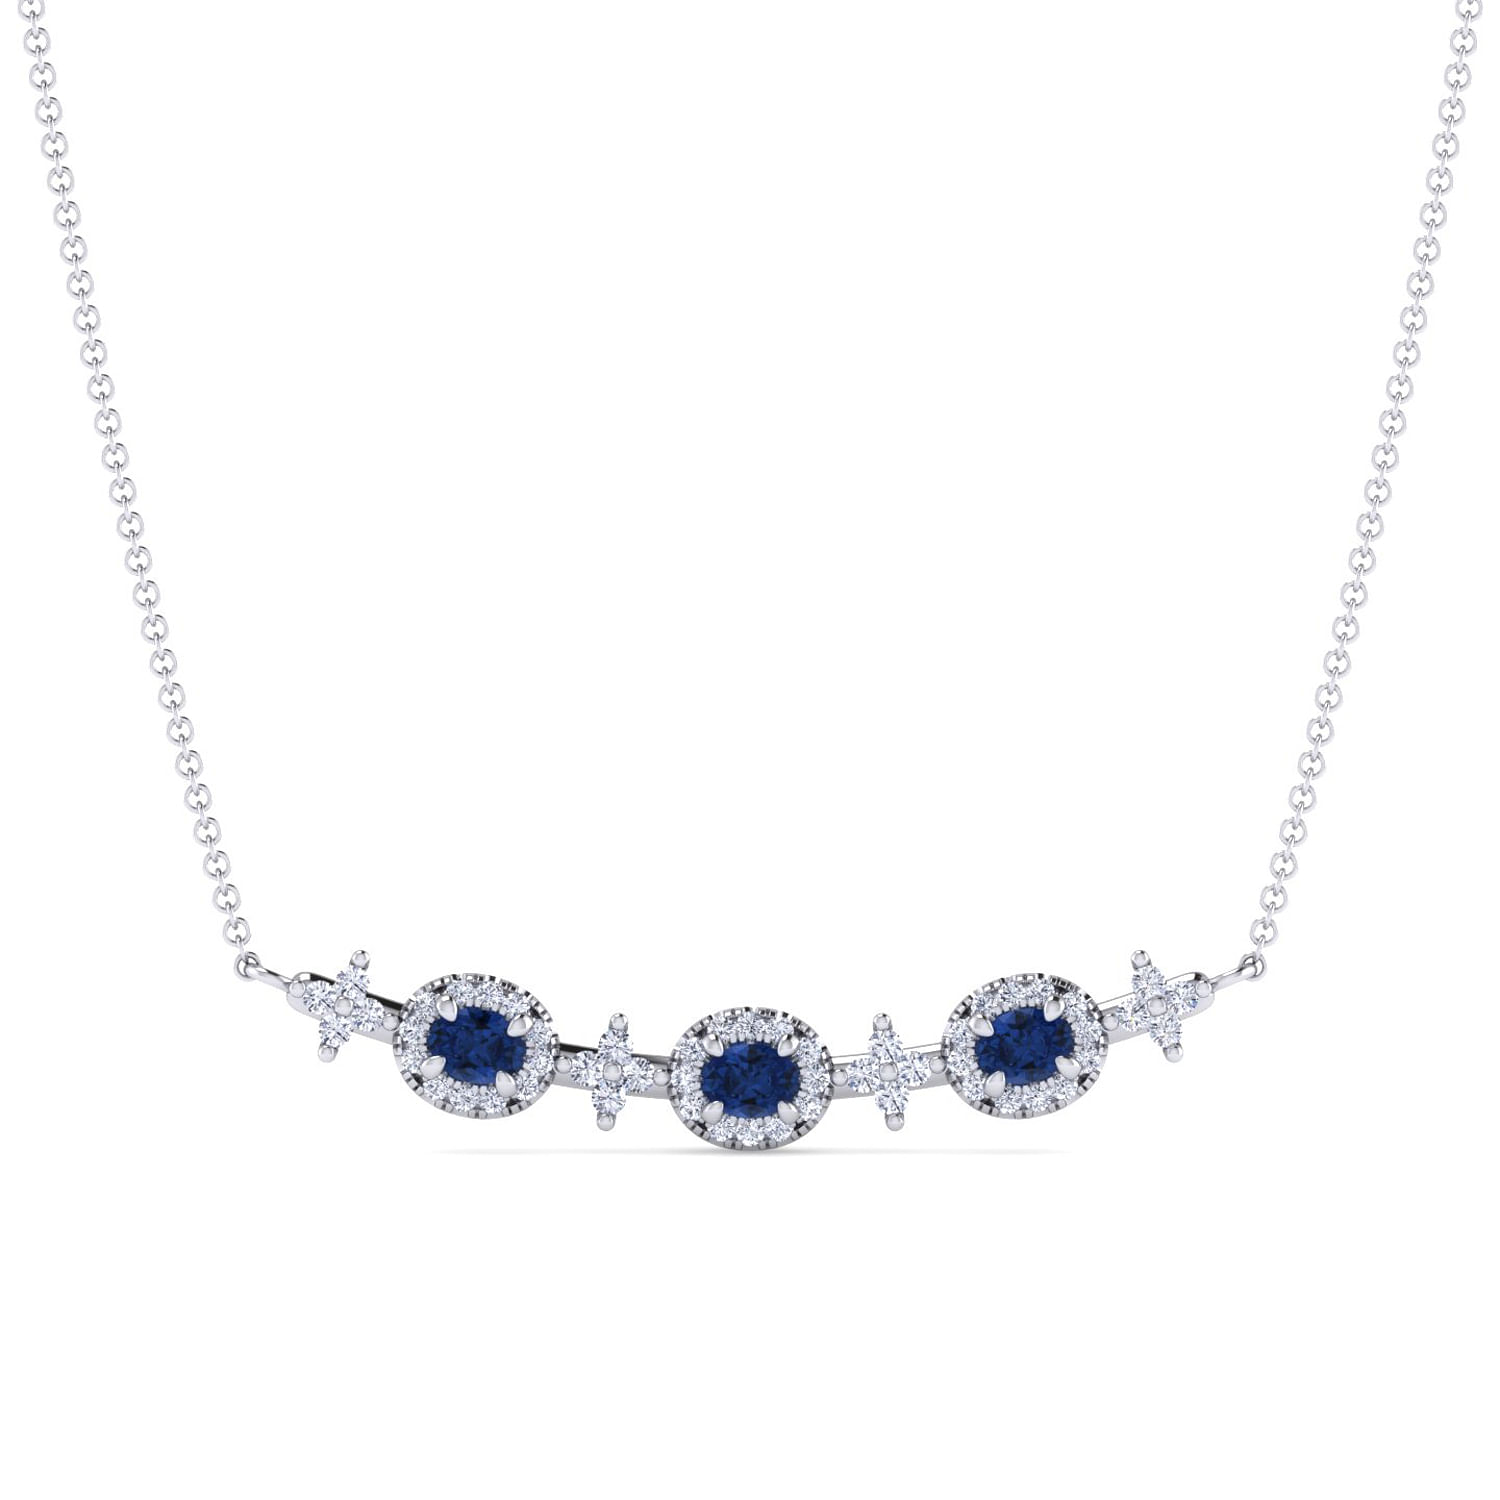 14K White Gold Diamond and Sapphire Bar Necklace